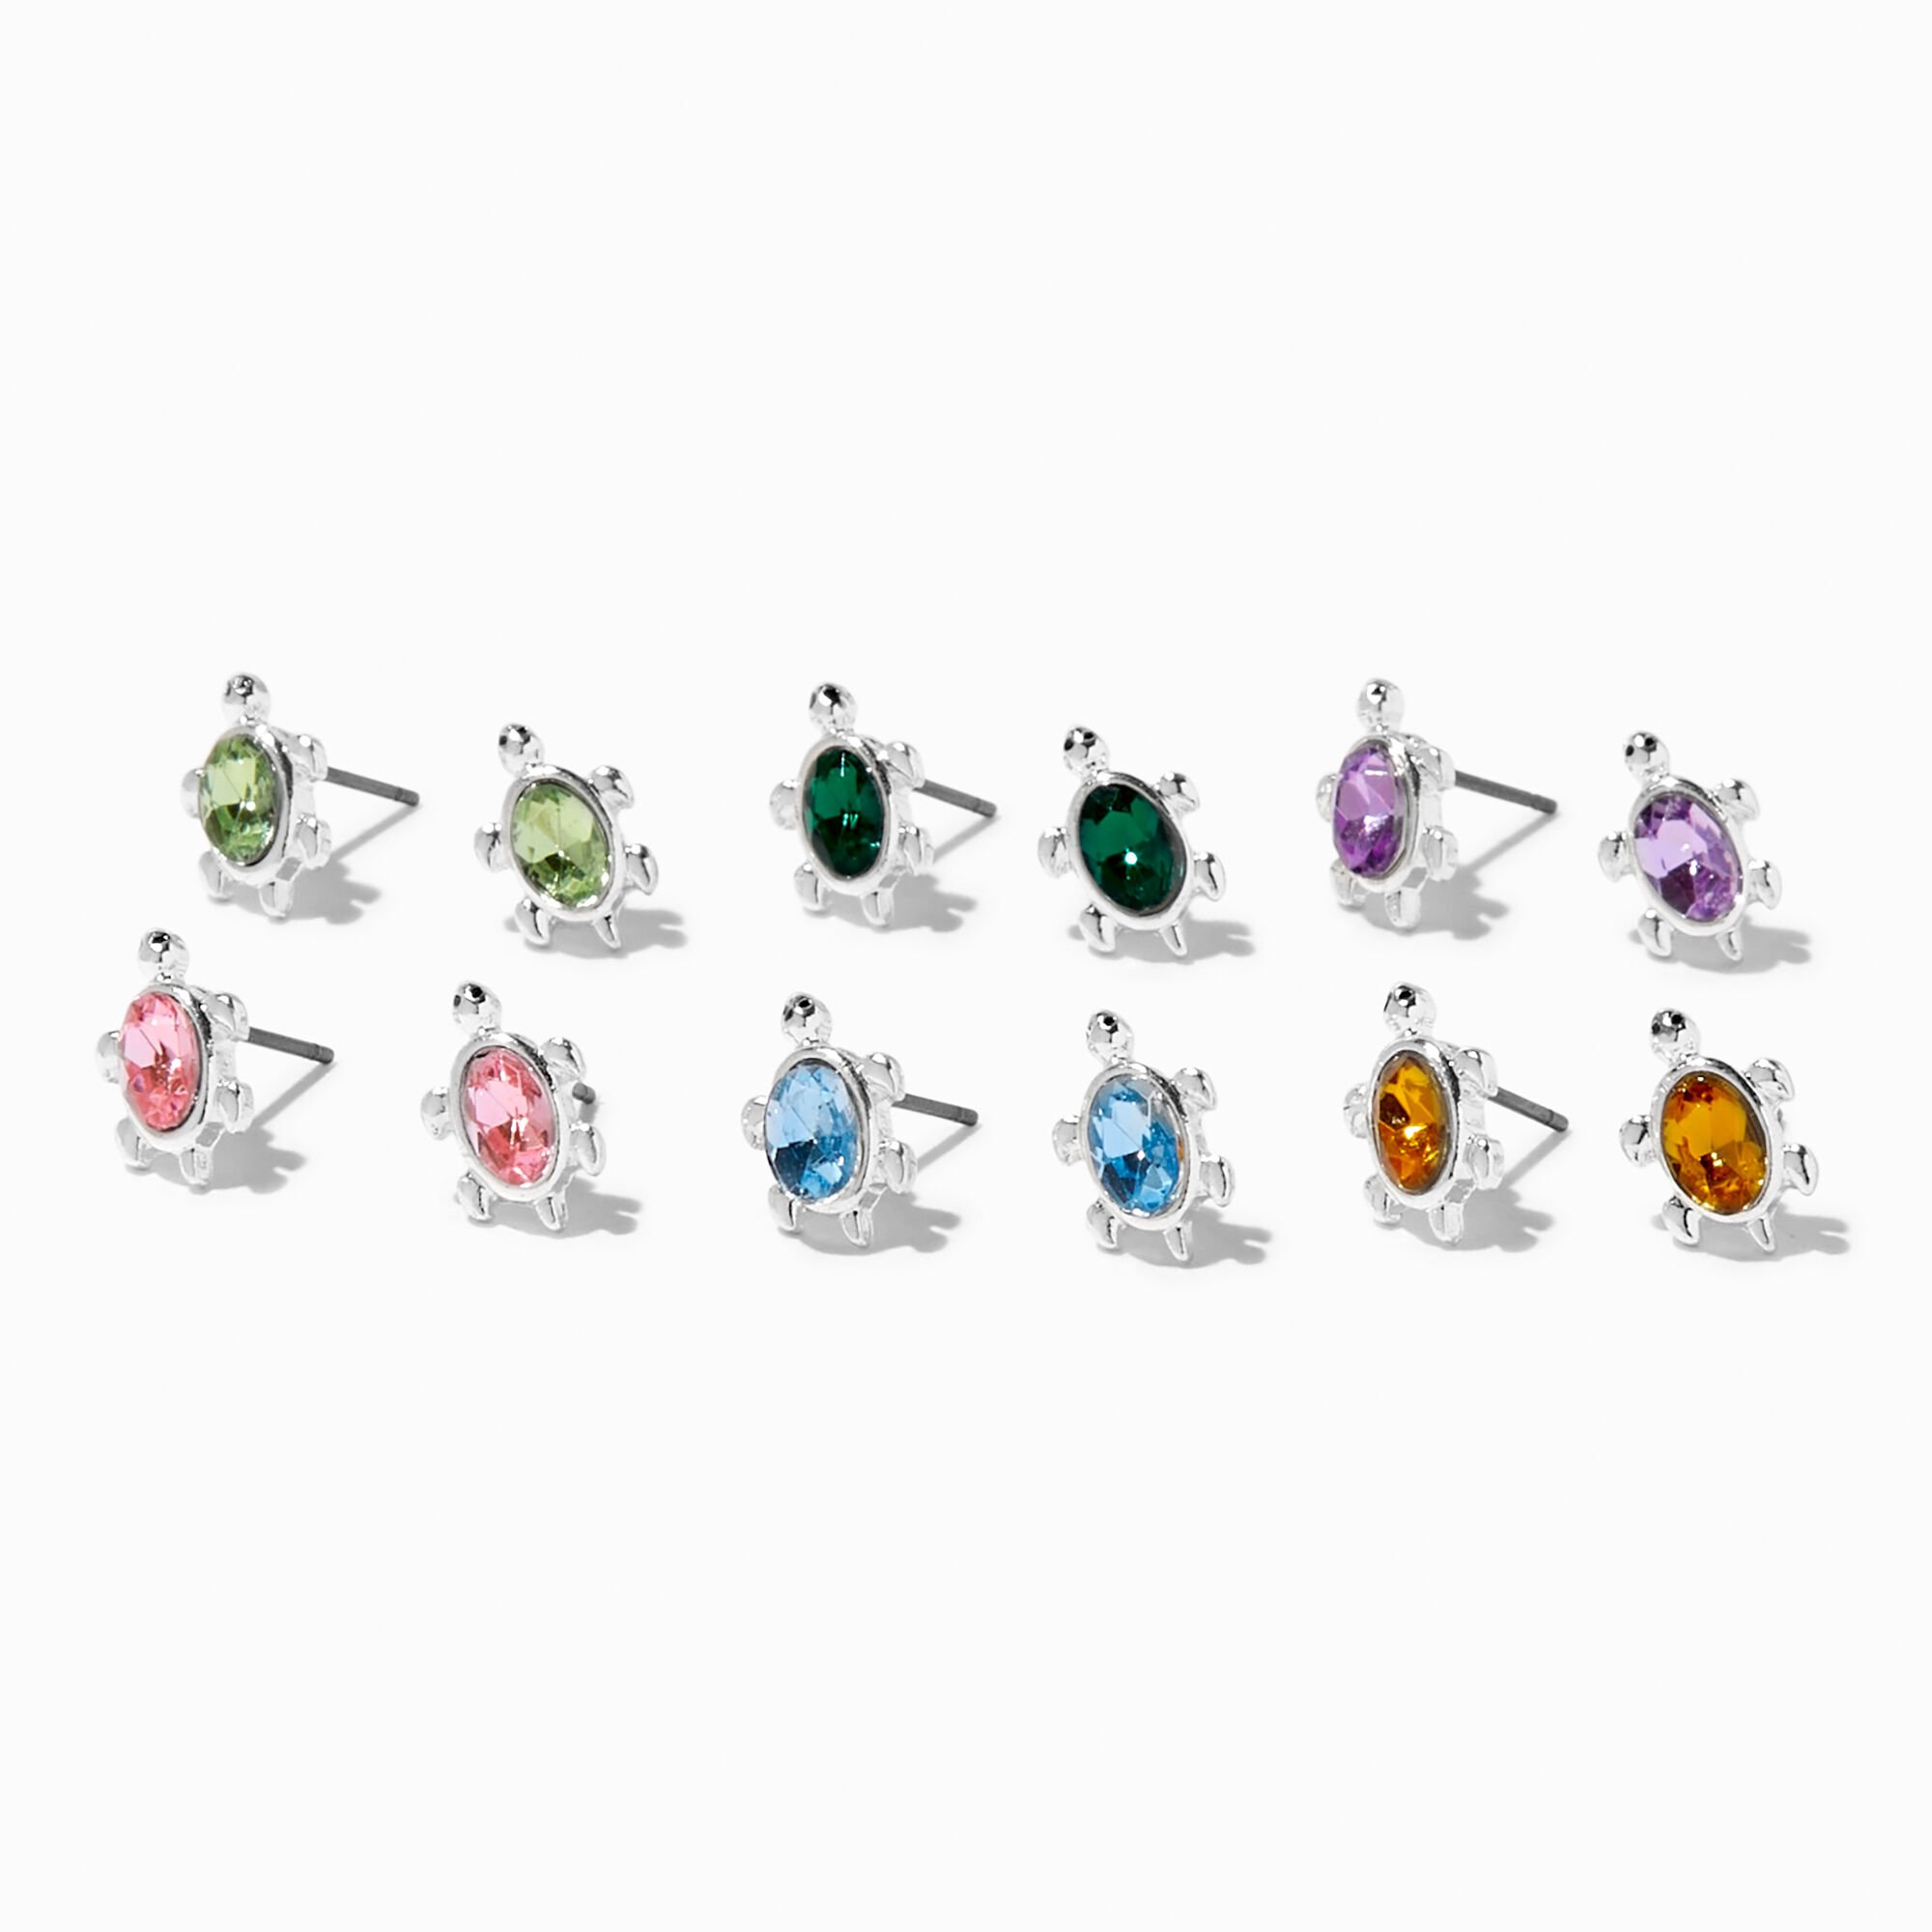 View Claires Tone Crystal Turtle Stud Earrings 6 Pack Silver information